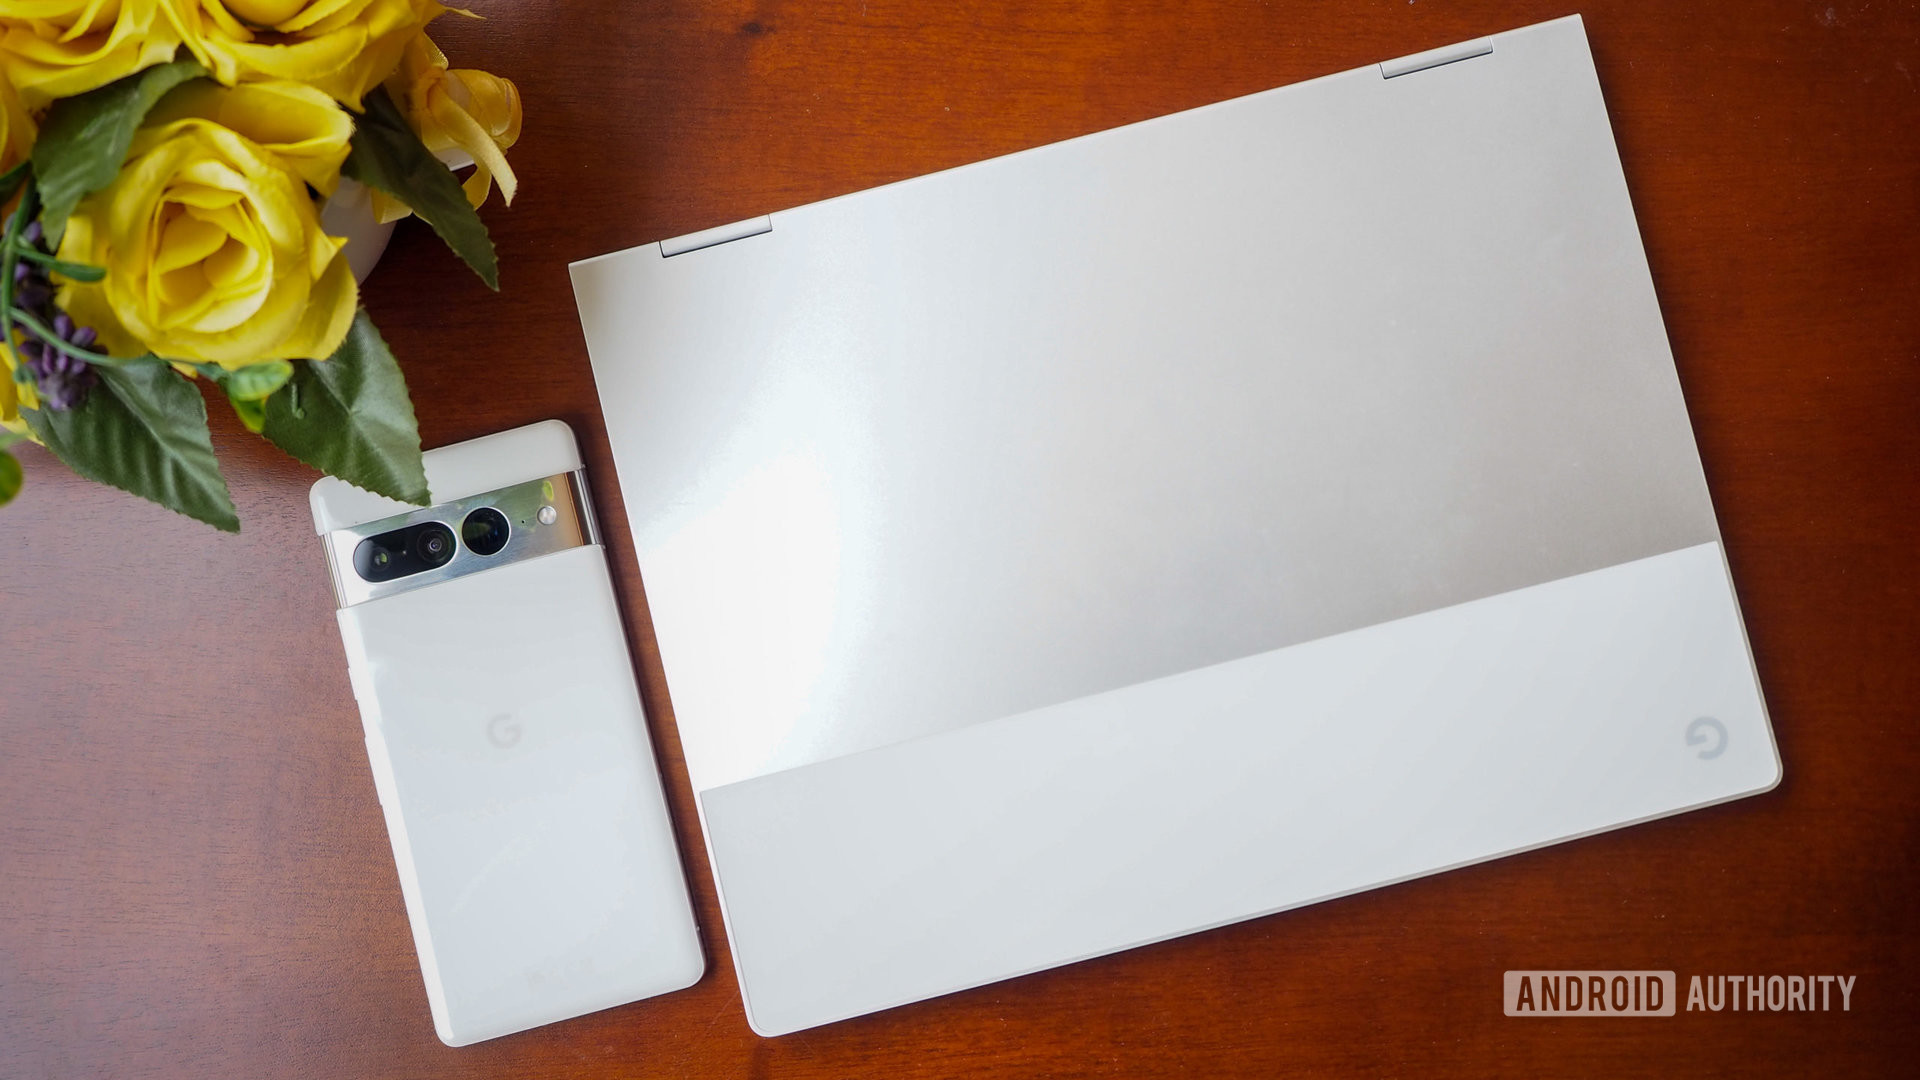 Google Pixelbook and Pixel 7 Pro on a brown table